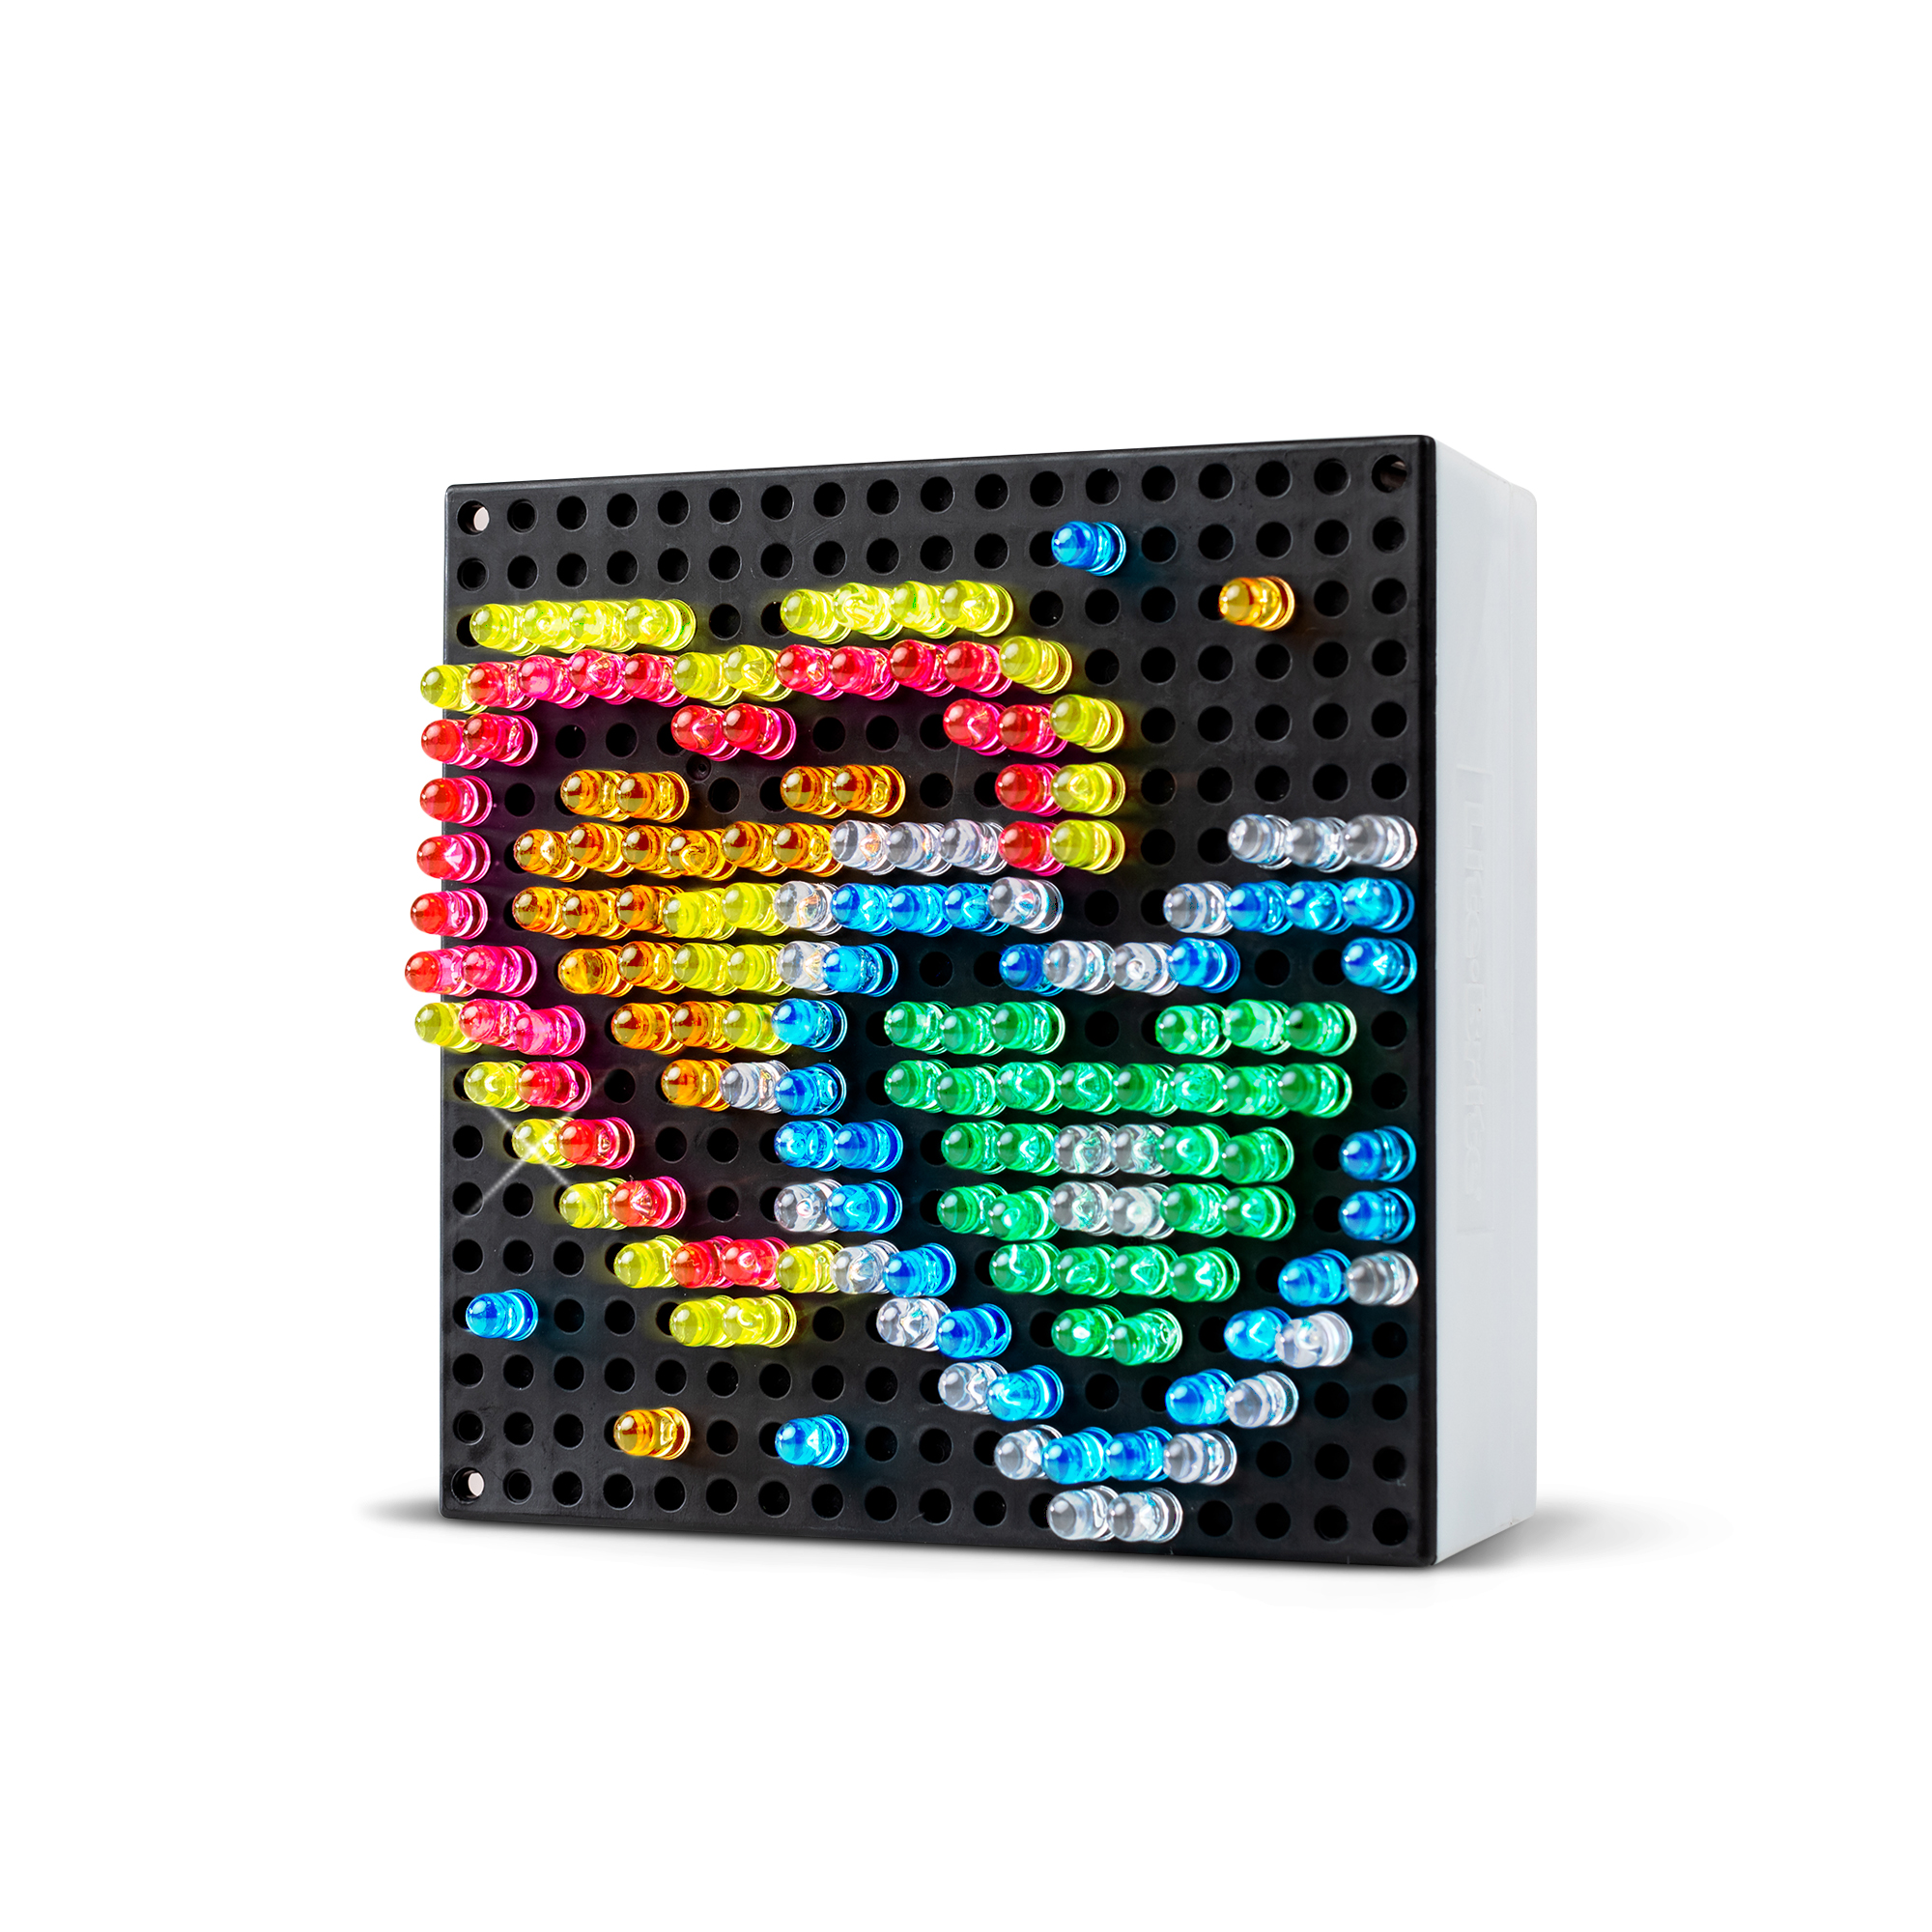 Bright Art 40 Template Refill Sheets - Emoji Themed: For Ultimate Classic  Size (8x6.75) Lite Brite Model LED Peg Board Toy by Bright Art